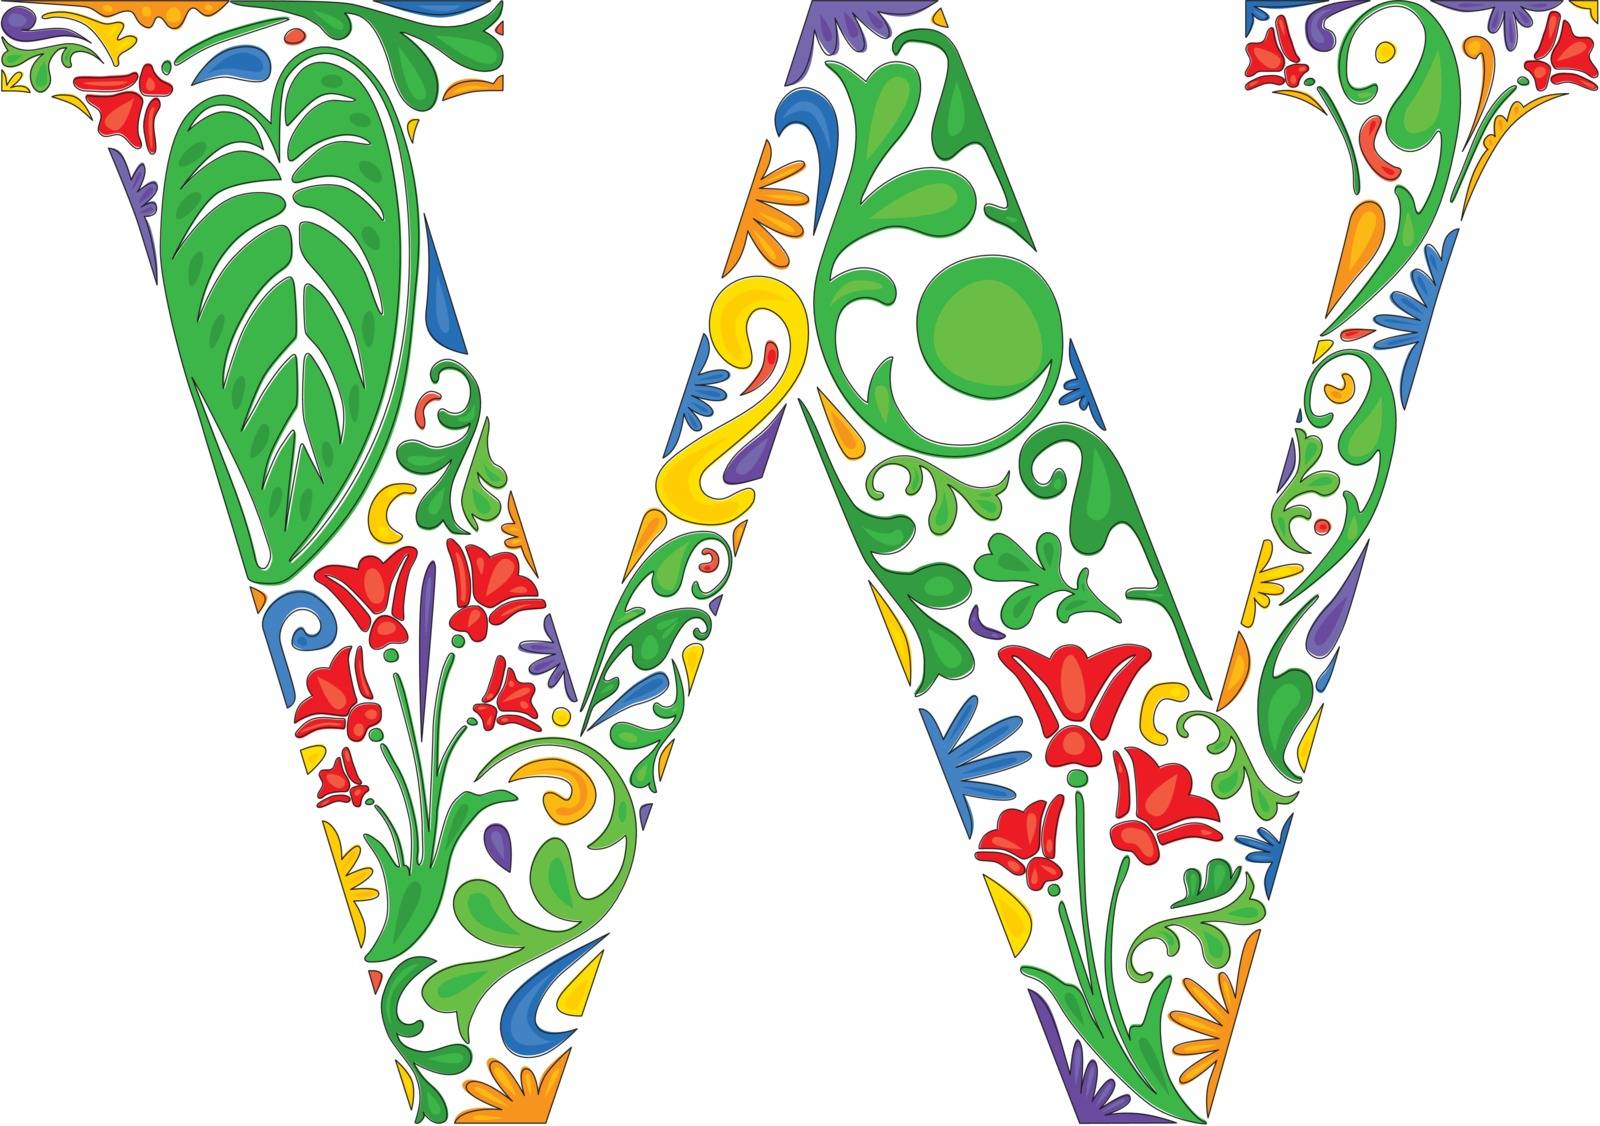 Colorful floral initial capital letter W